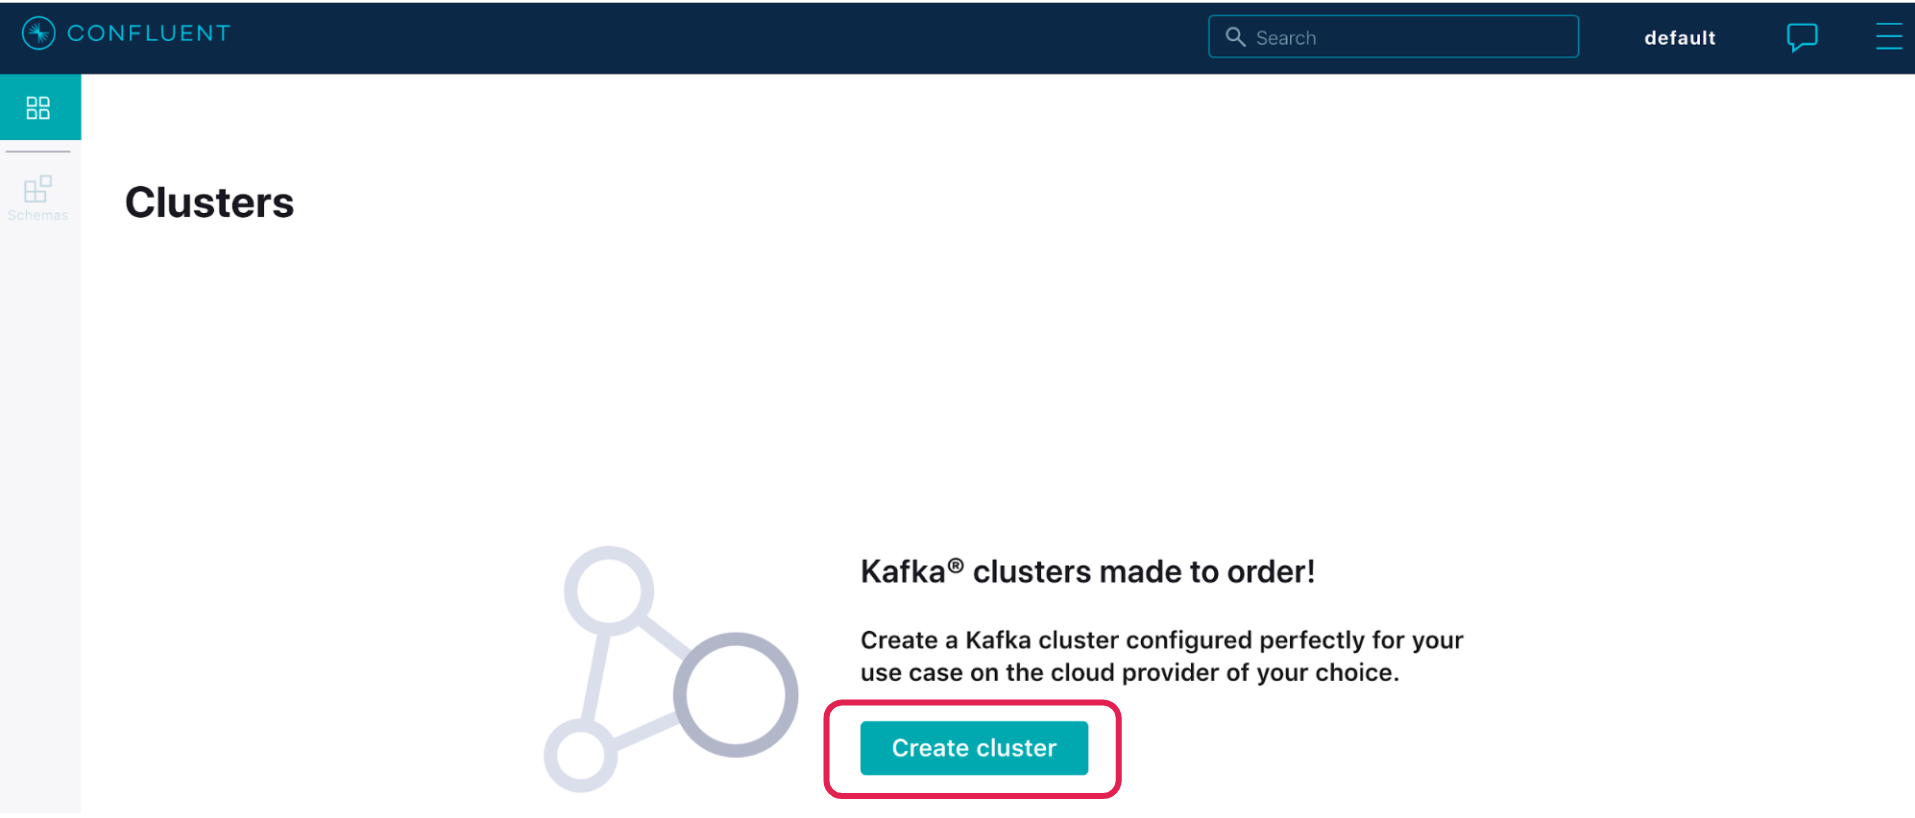 Kafka clusters made to order